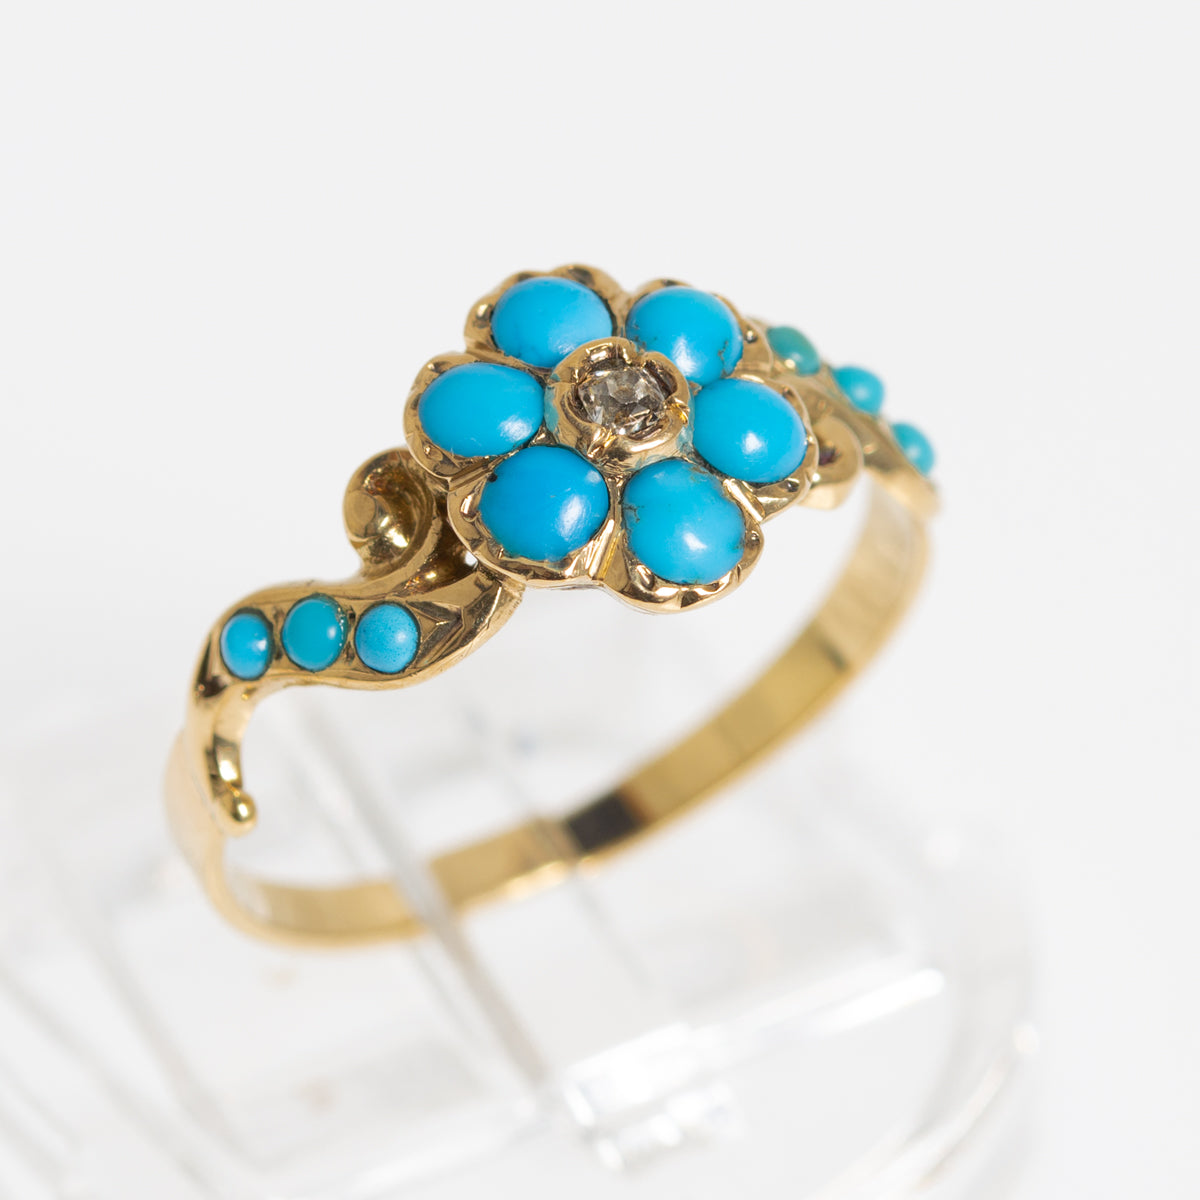 Antique Victorian 18ct Gold Turquoise & Mine Cut Diamond Daisy Ring c1880 (A1253)